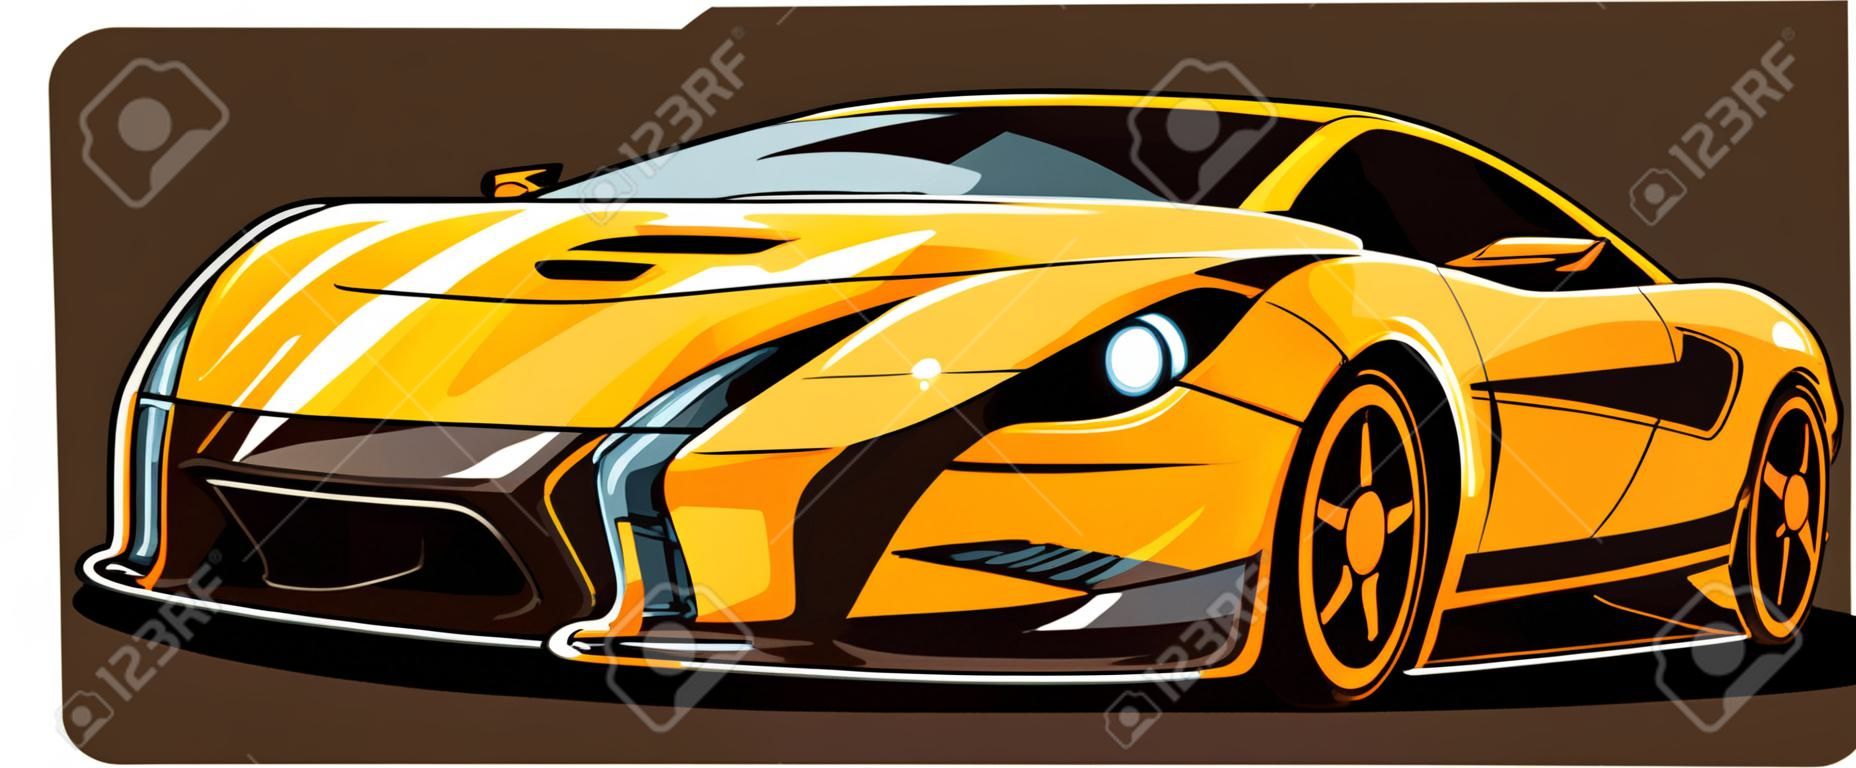 Urban Elegance in Vector Black Car Artistry Set Against City Skylines Vector Illustration of a Muscular Black Car Ideal for Auto Enthusiasts